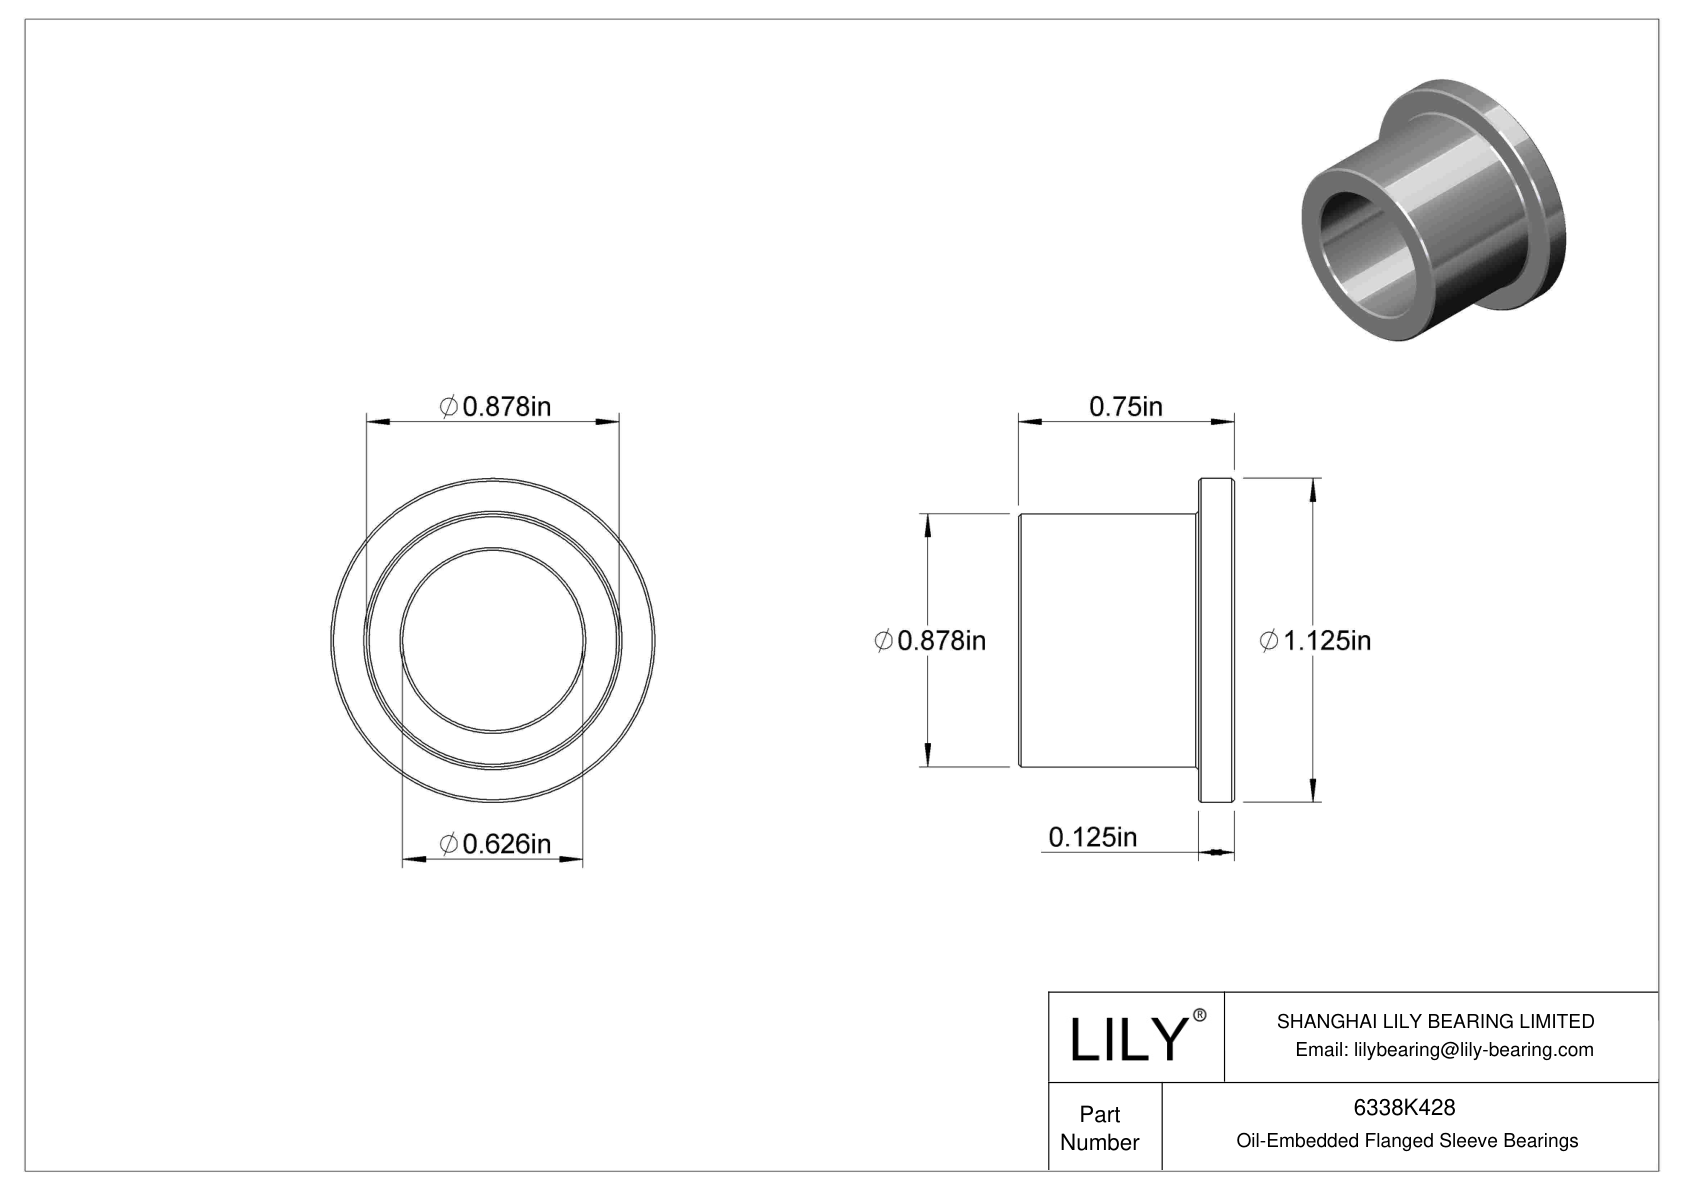 GDDIKECI Oil-Embedded Flanged Sleeve Bearings cad drawing